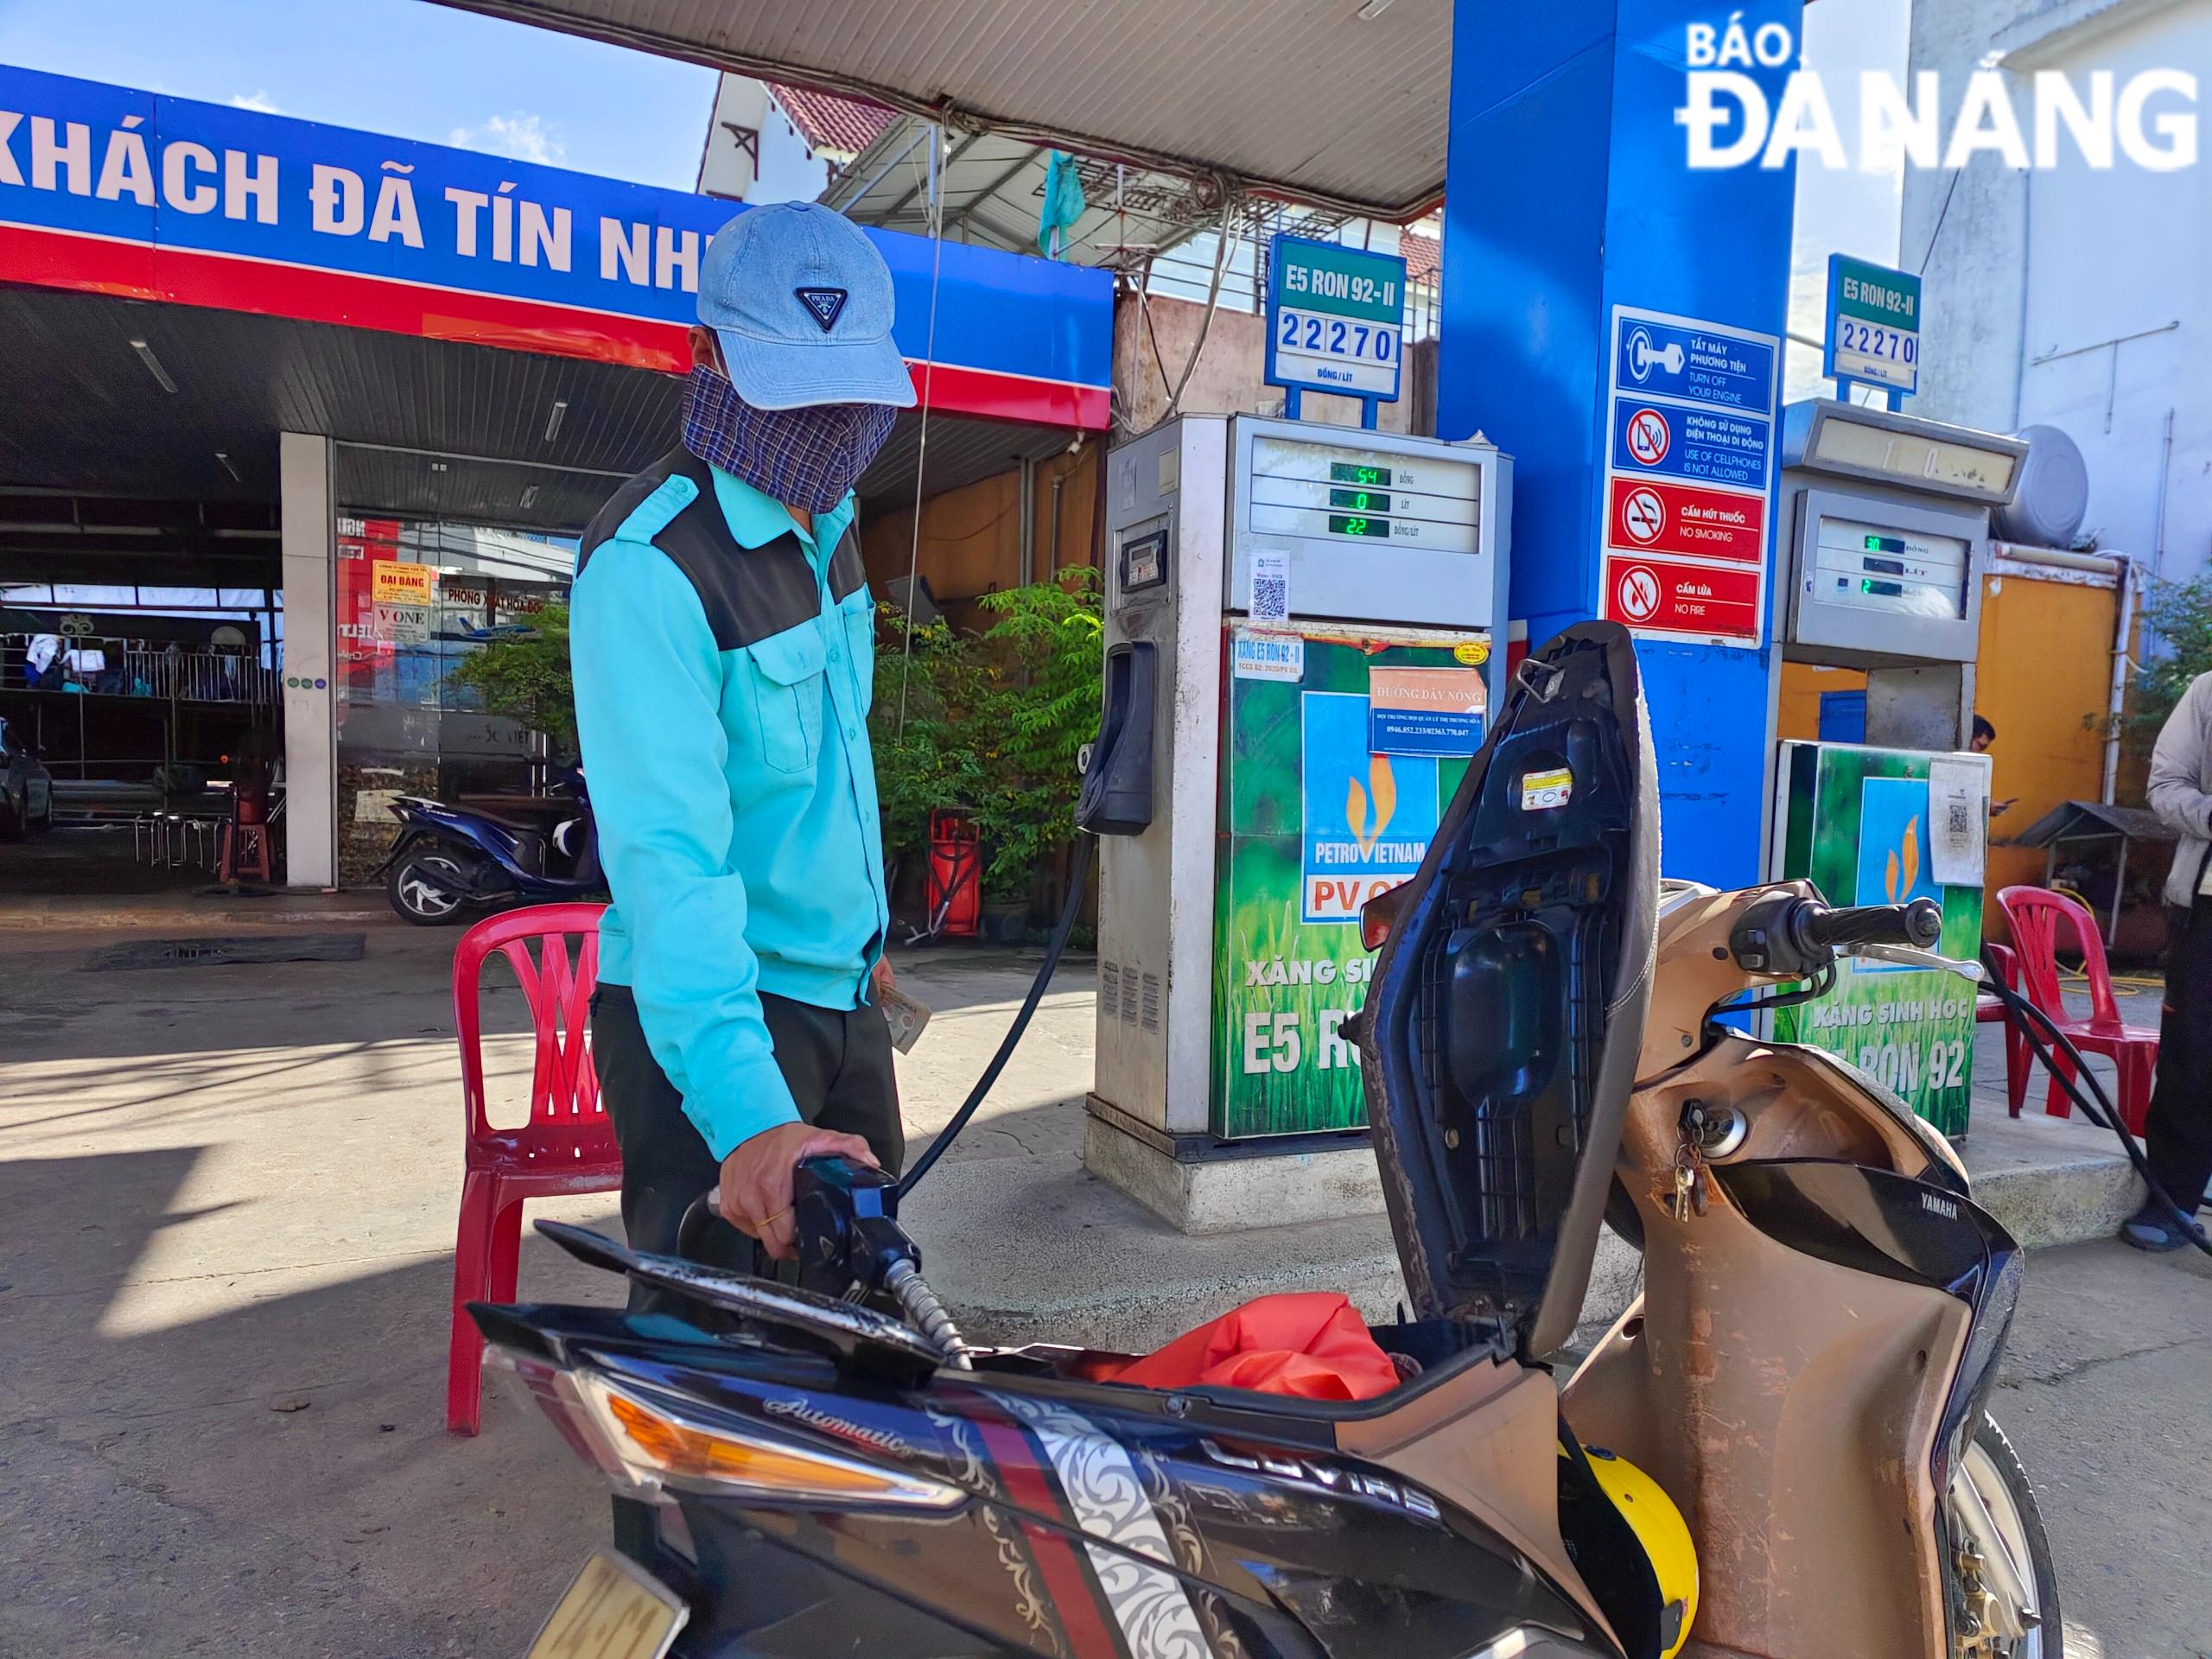 Gasoline prices decreased for the second time in a row in November. Photo: CHIEN THANG